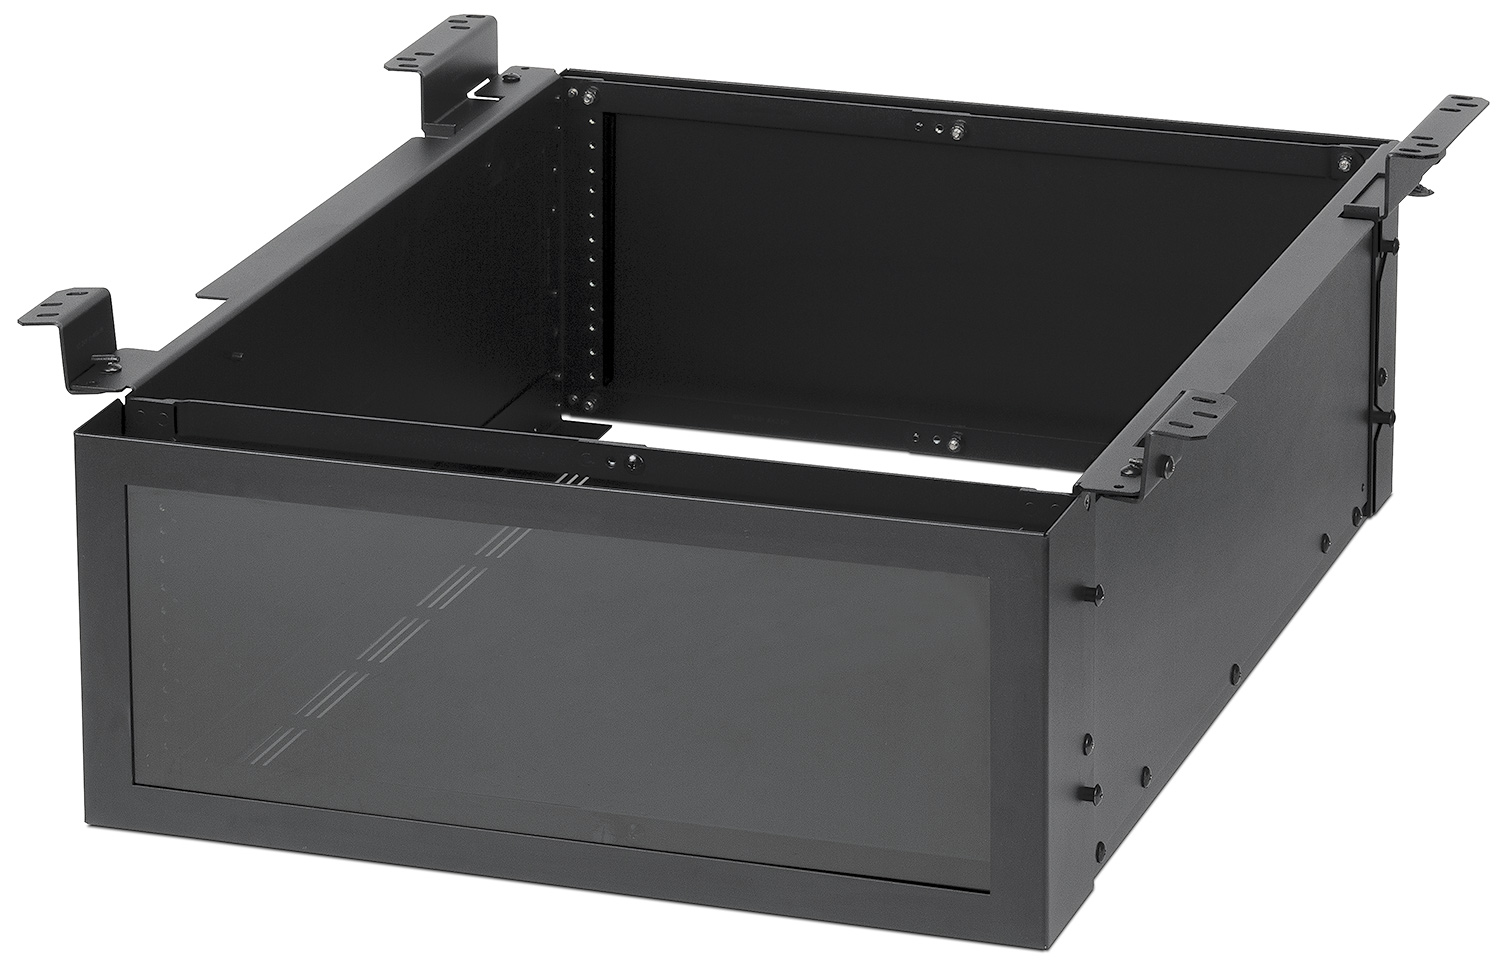 UTR 104 Rack Mount with optional side, bottom, front, and back panels